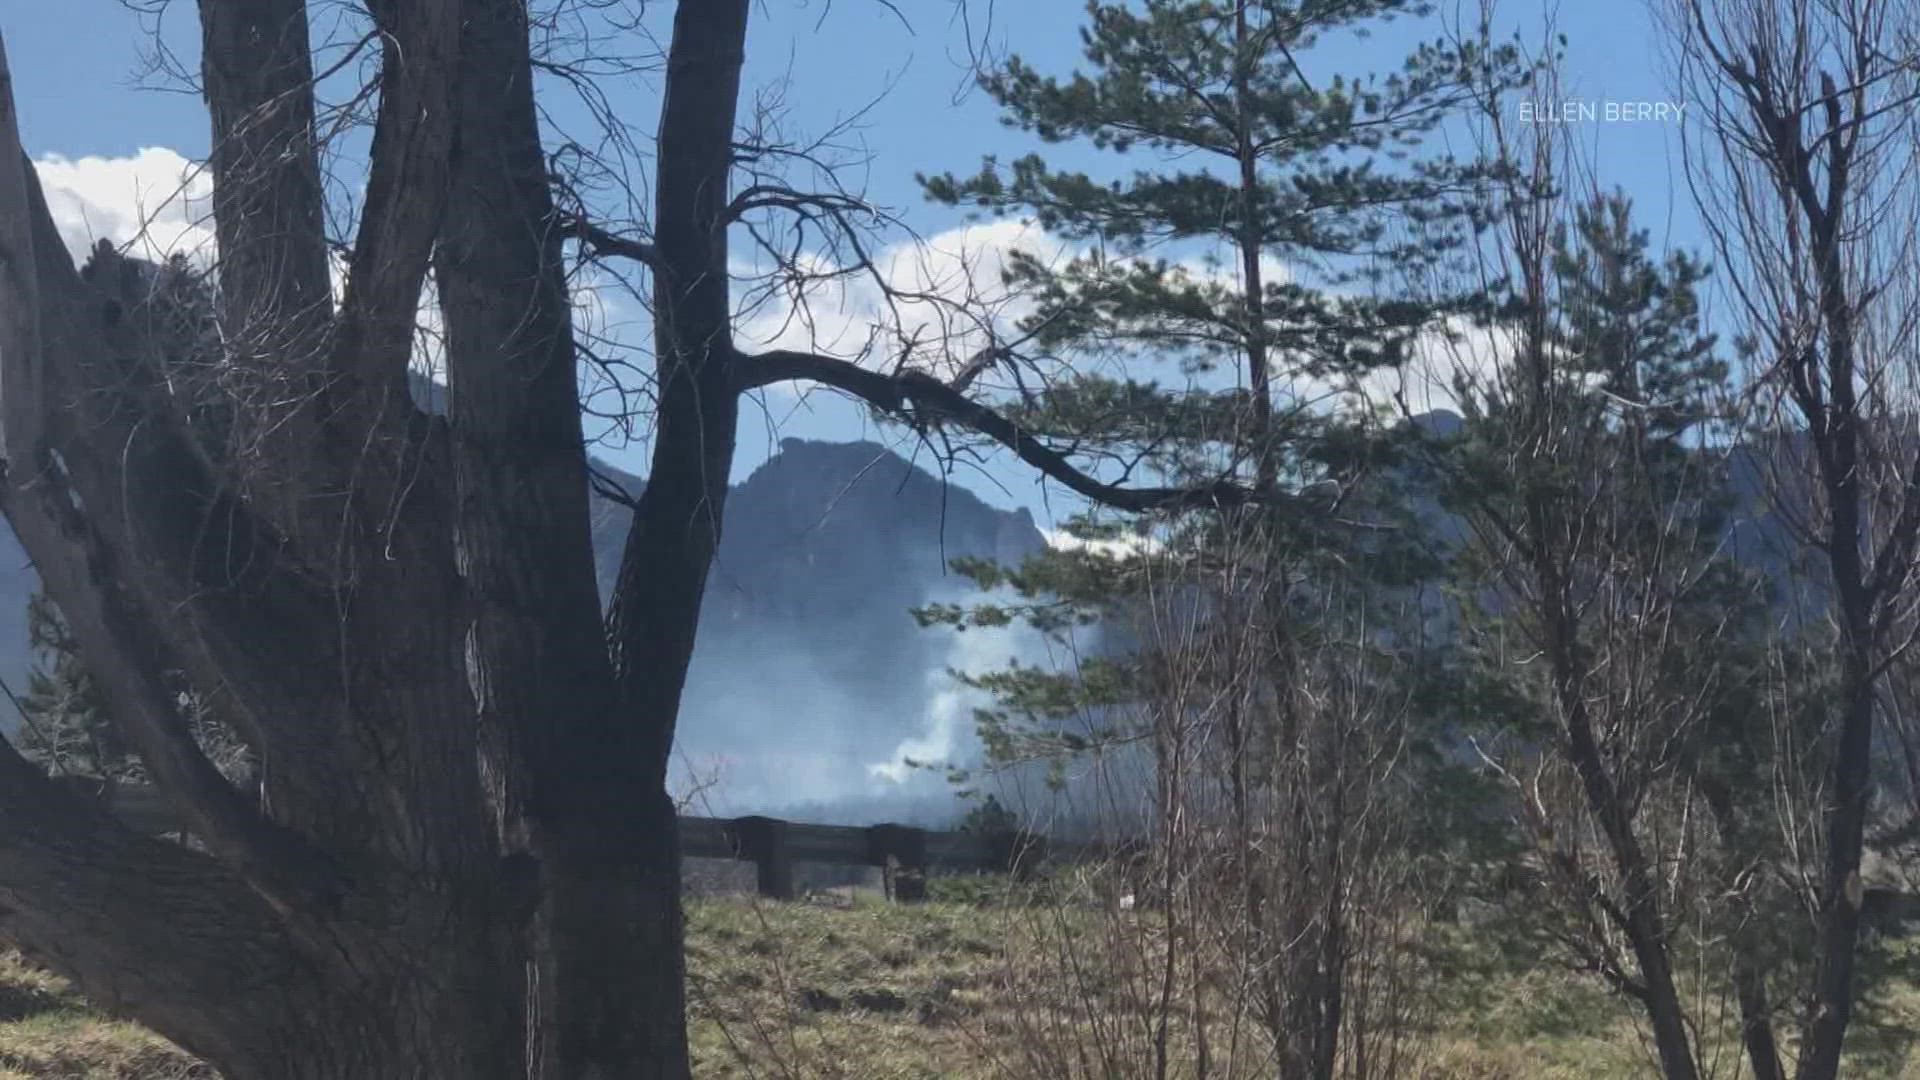 The North Shanahan Ridge Fire grew to only 0.6 acres before it was contained.